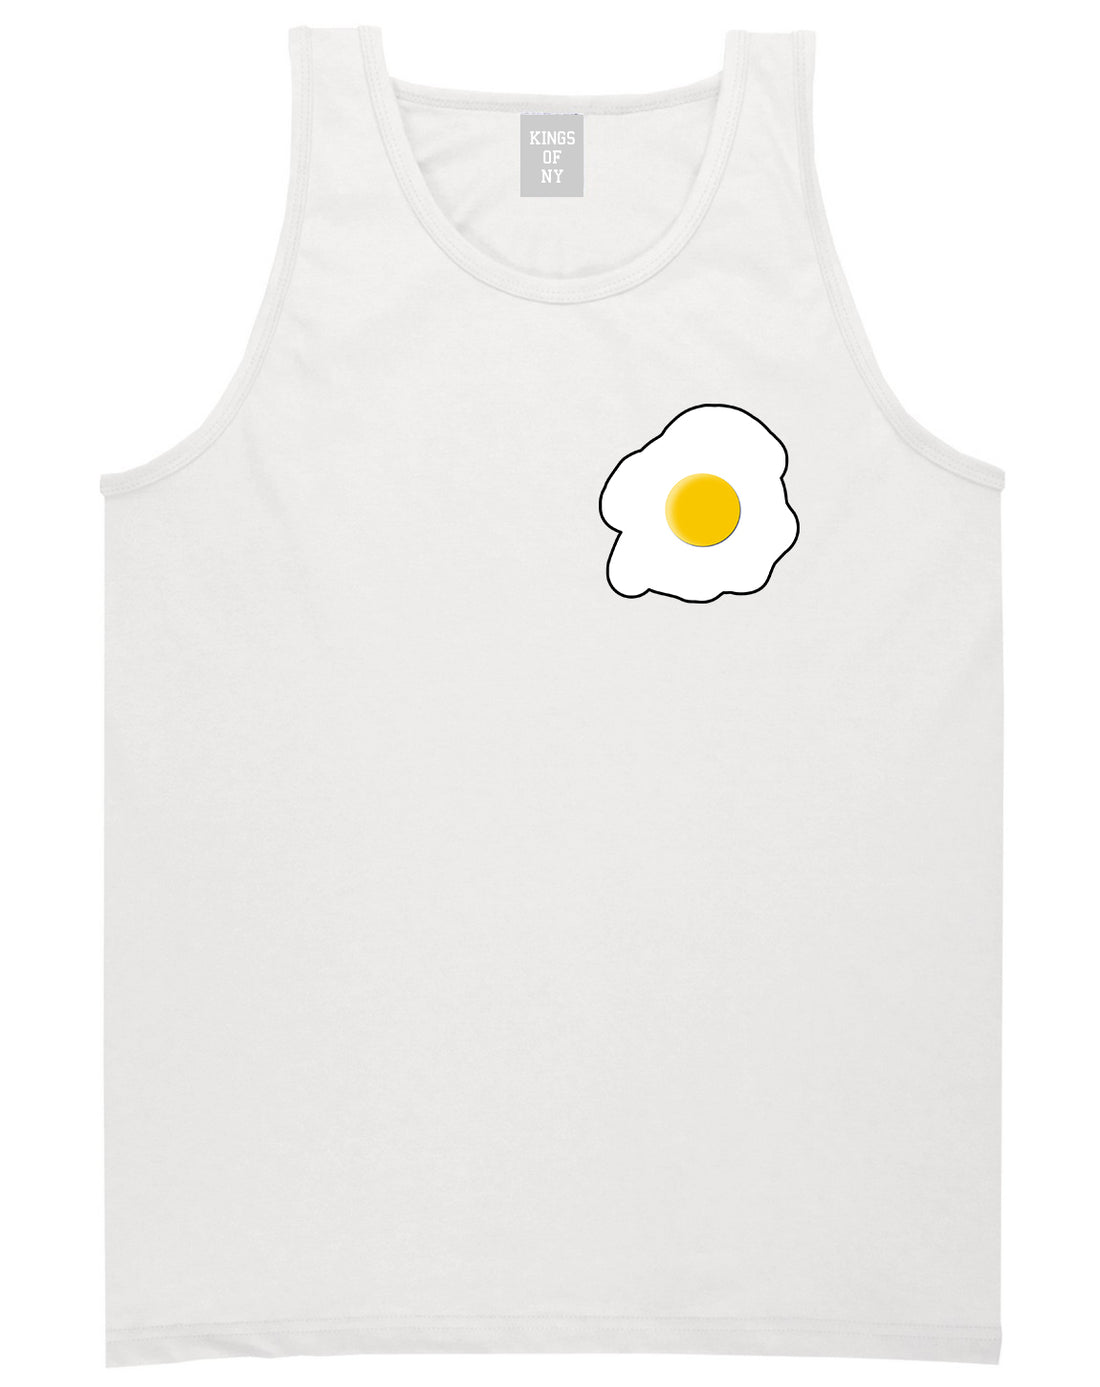 Fried Egg Breakfast Chest Mens White Tank Top Shirt by KINGS OF NY